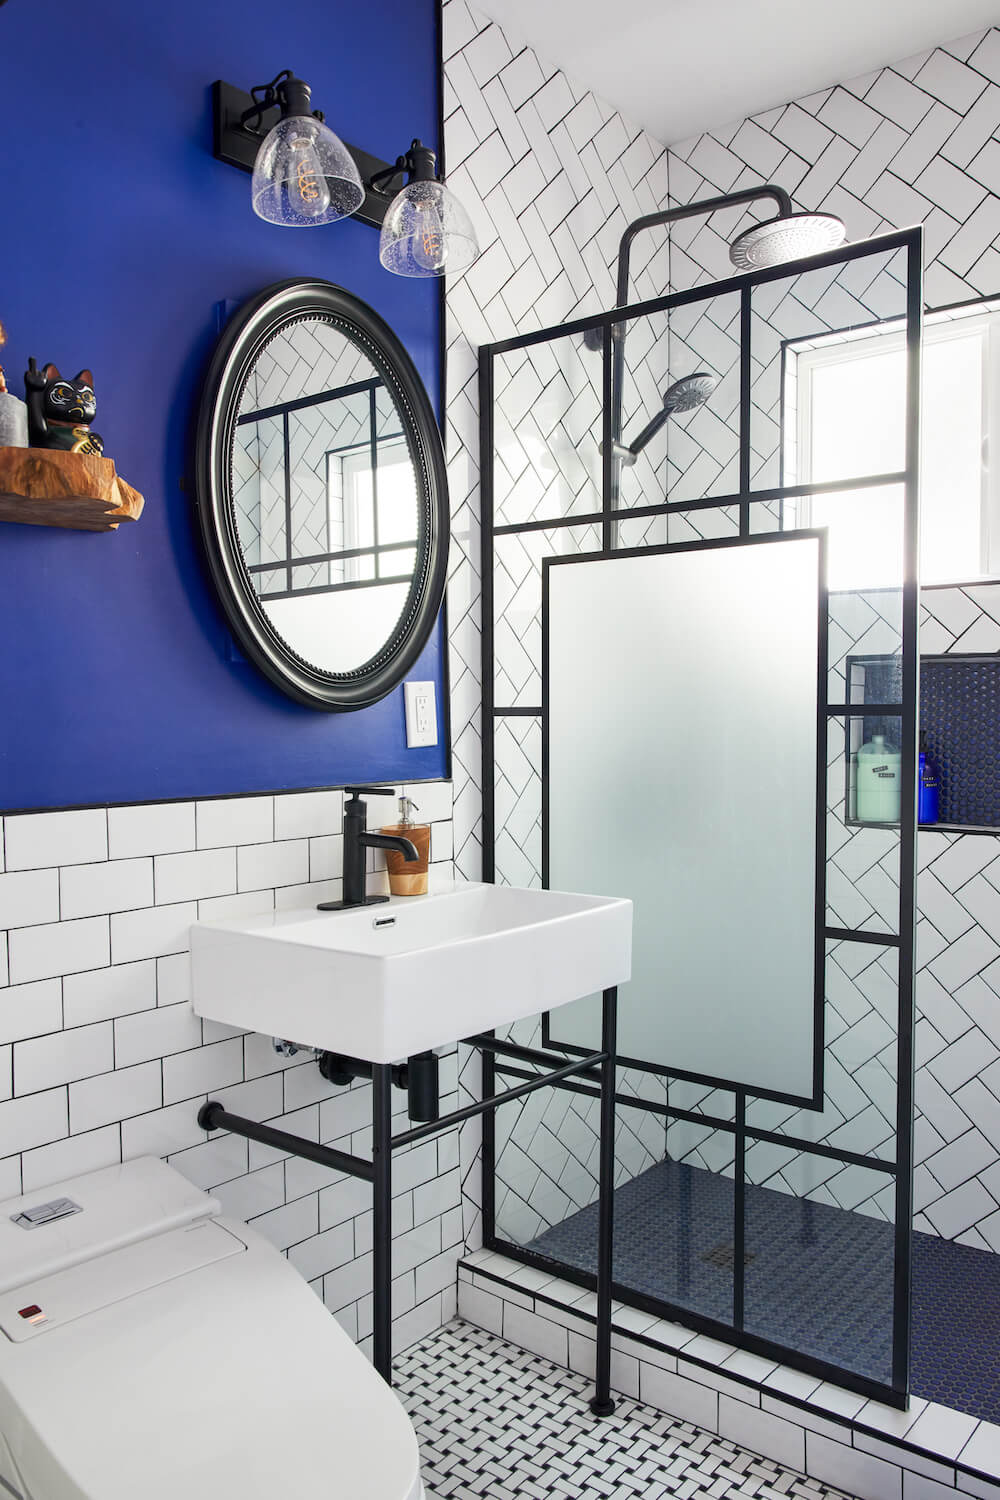 A small bathroom with a doorless walk-in shower and black metal fixtures.